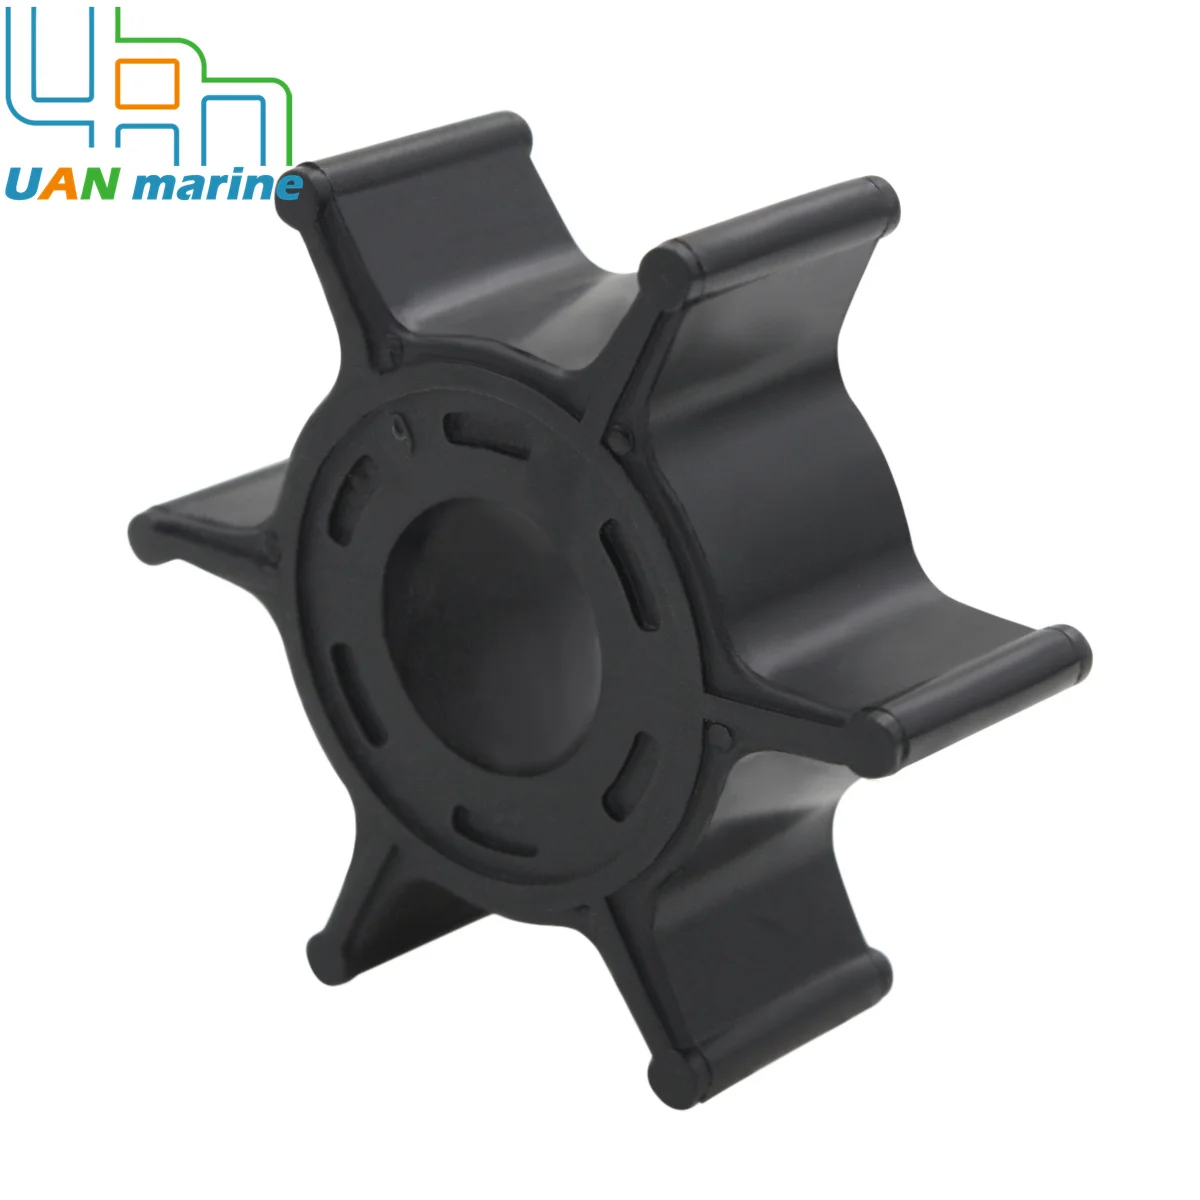 19210-ZW9-003  Water Pump Impeller For Hond  4-STROKE Outboard BF 8 9.9 HP Motor 19210-ZW9-013 19210-ZW9-003